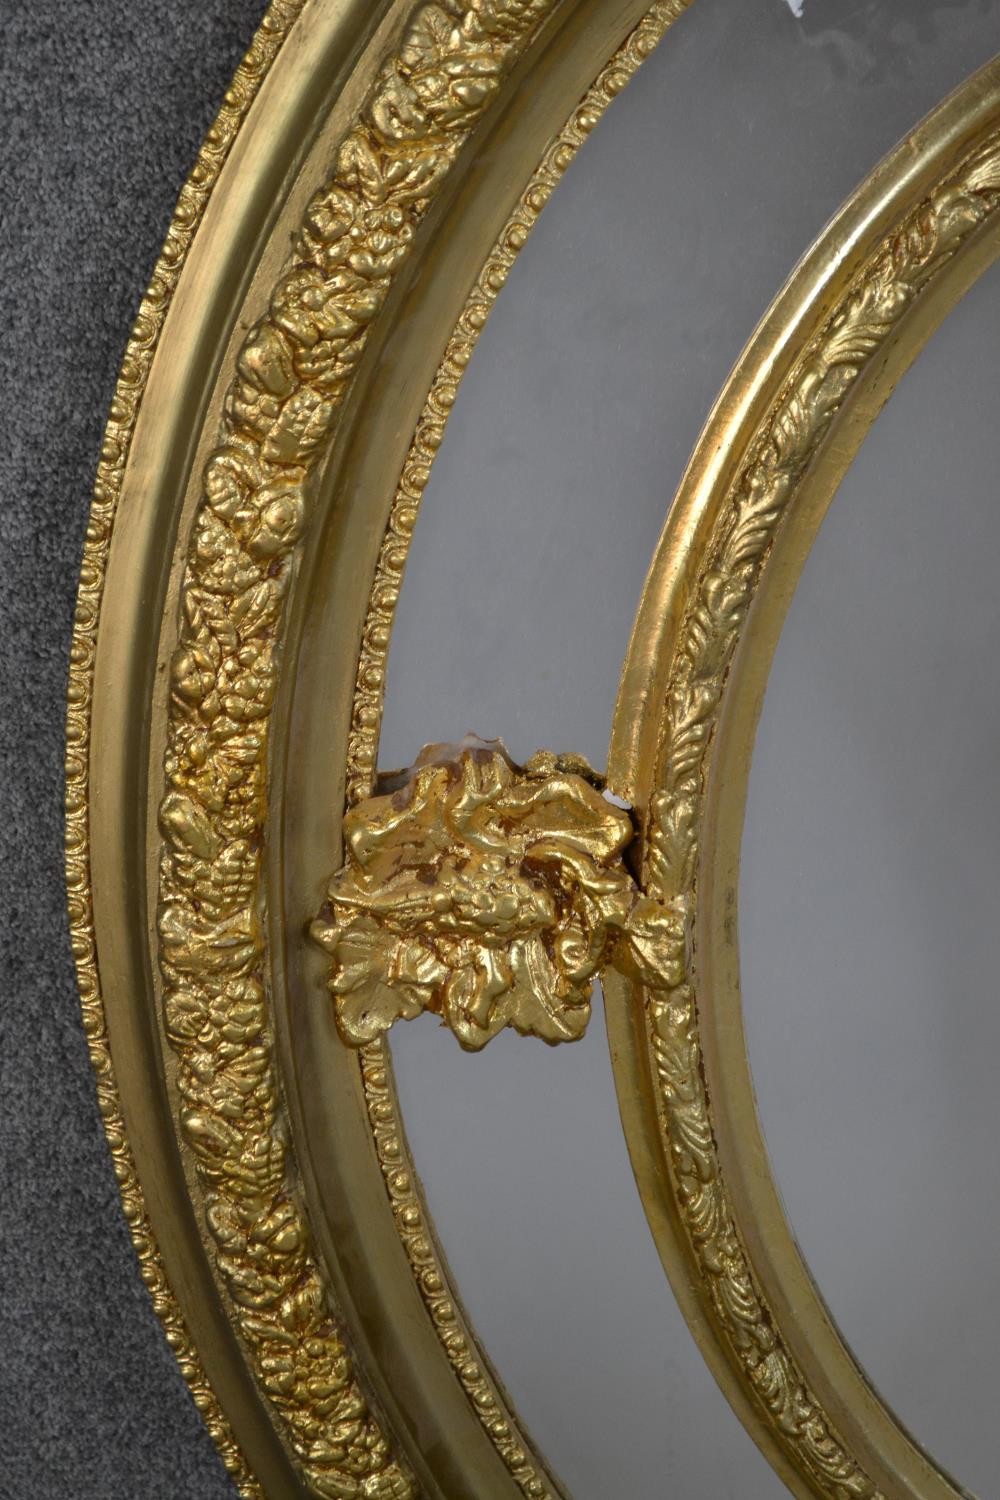 A Victorian gilt framed oval mirror, with a sectional mirror plate in an ornately moulded frame with - Image 4 of 5